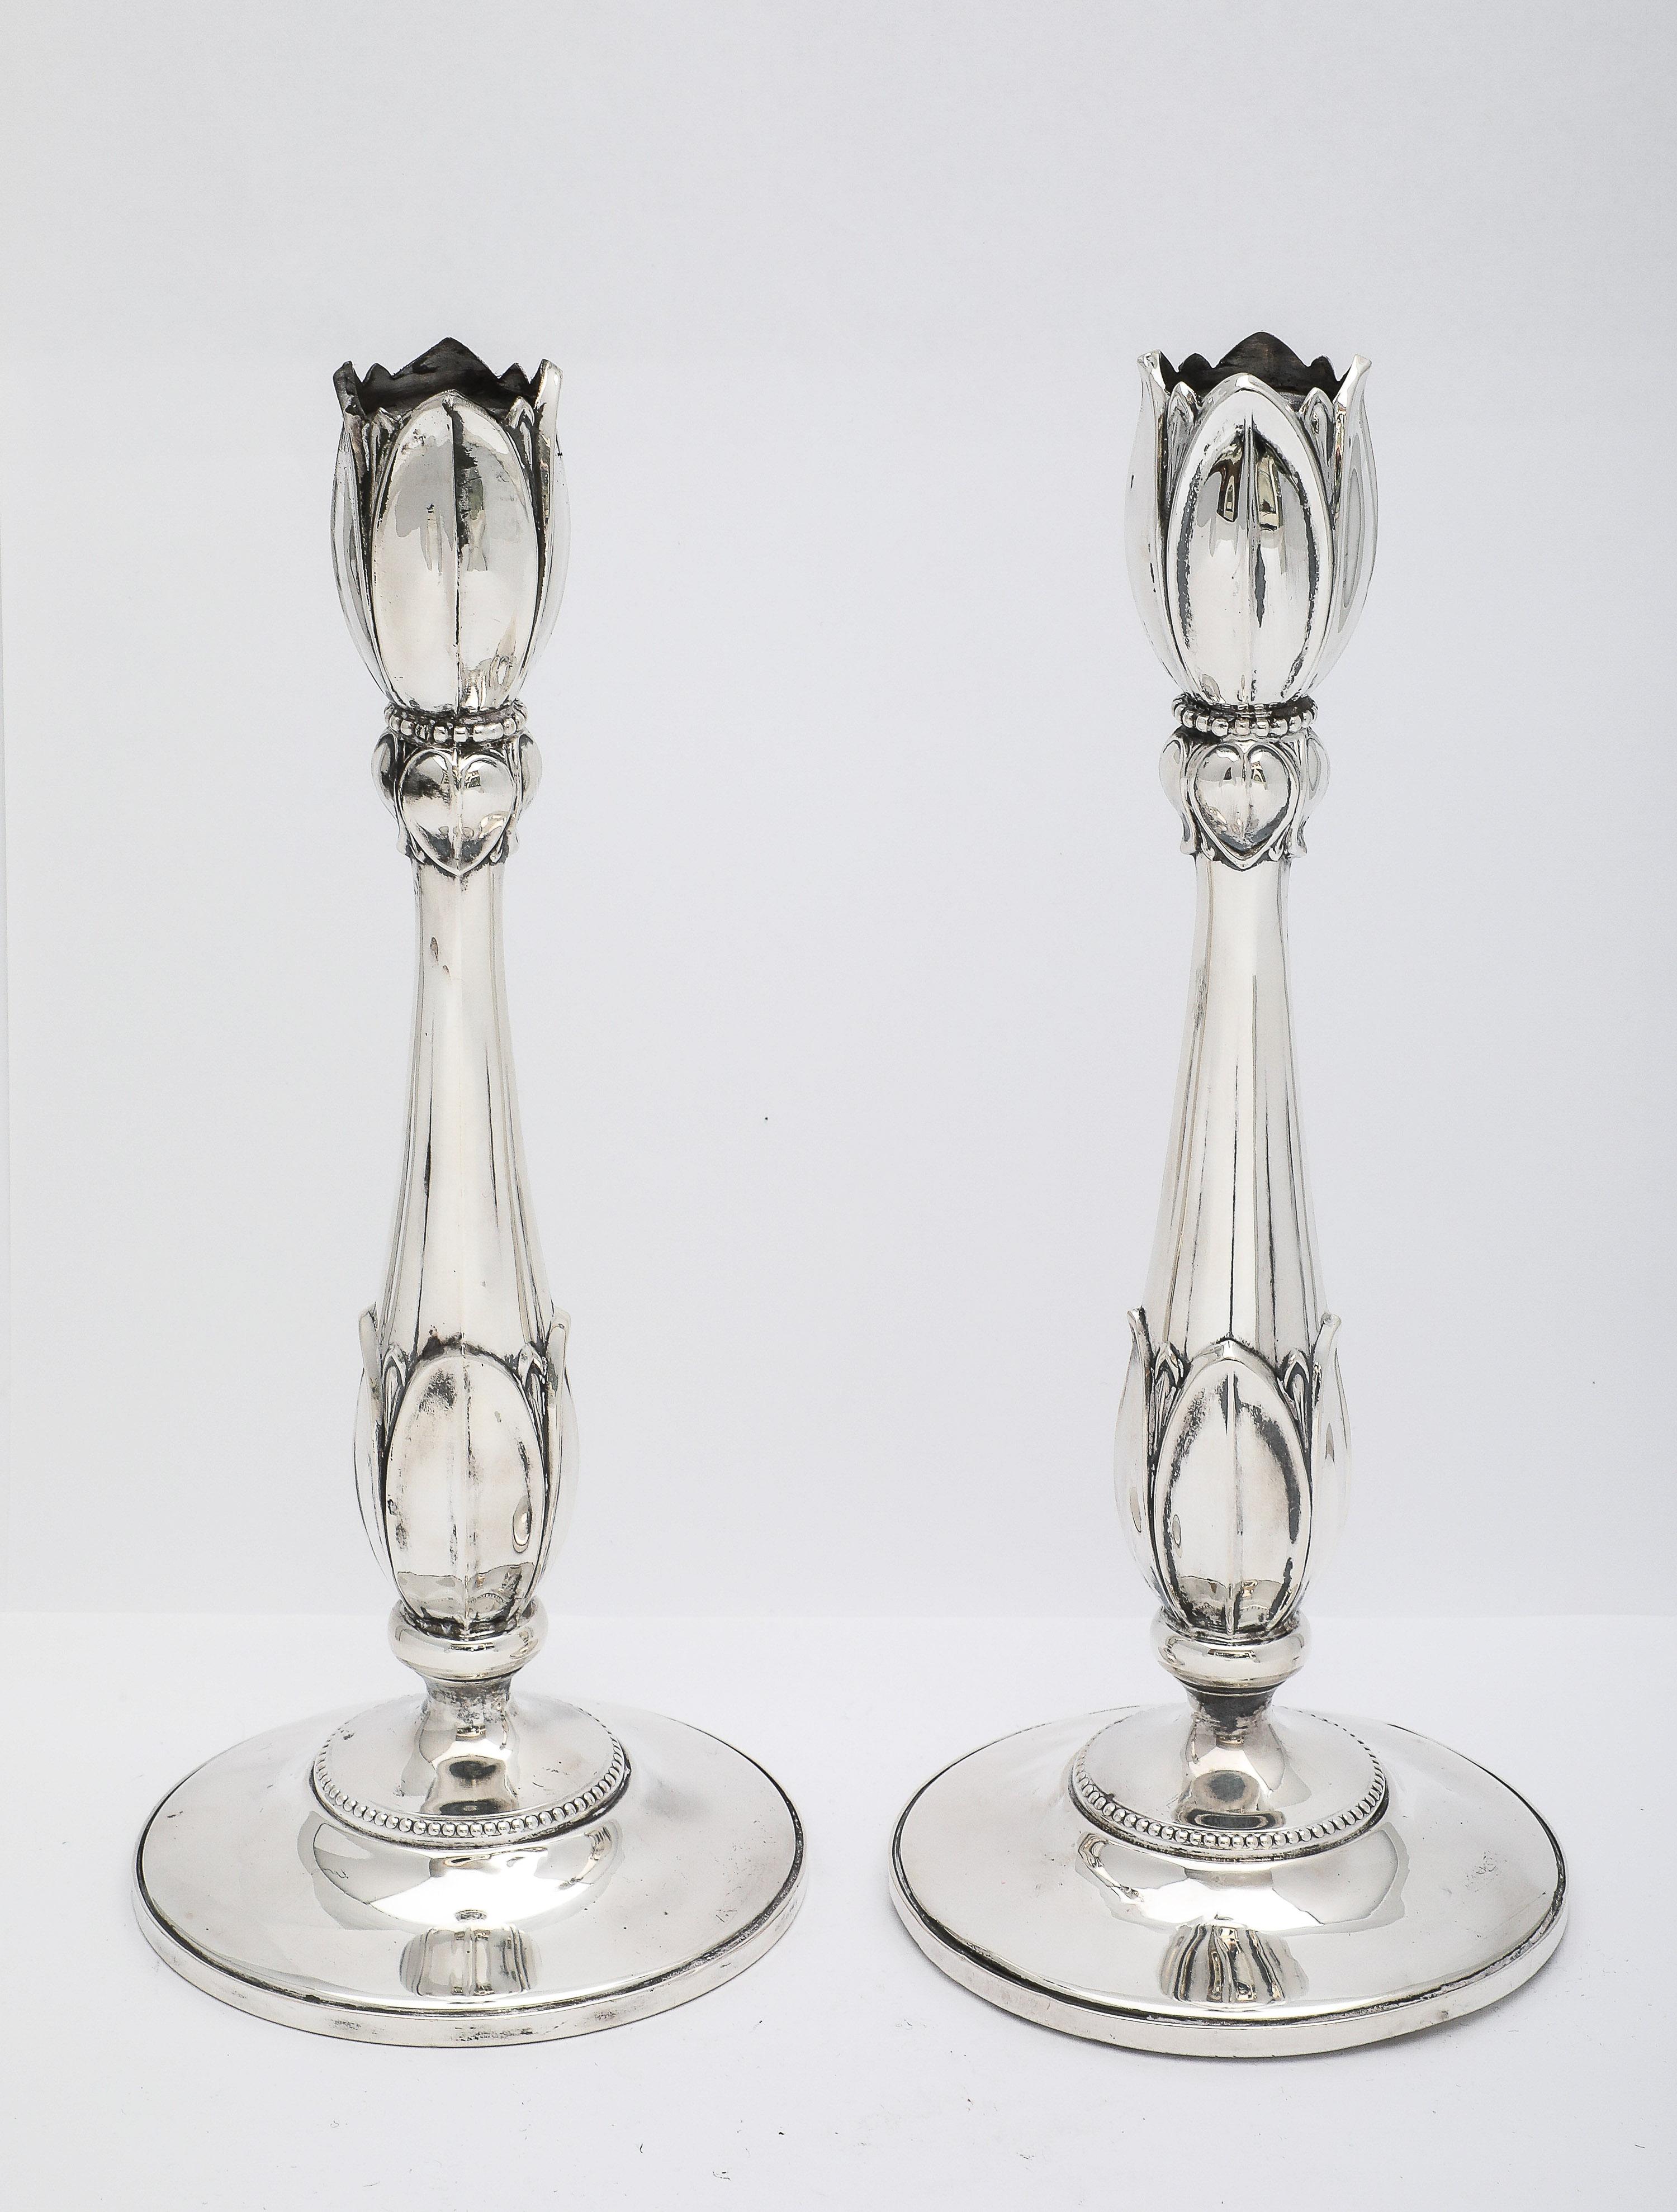 Rare Pair of Tall Sterling Silver Art Nouveau-Style Flower-Form Candlesticks For Sale 5